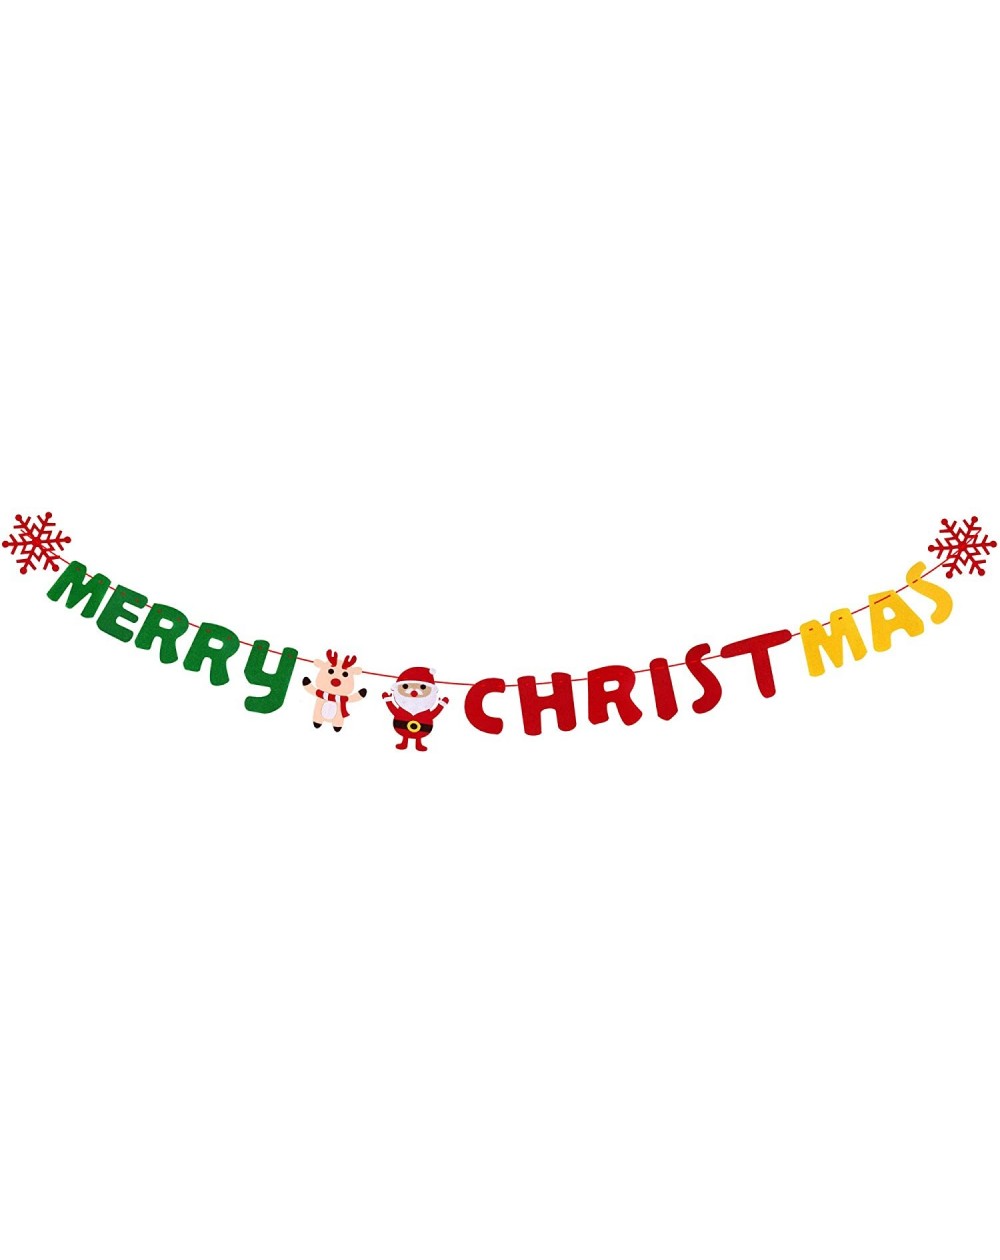 Banners & Garlands Merry Christmas Party Decorations - Includes Merry Christmas Banner- Perfect for Fireplace Mantle Tree Off...